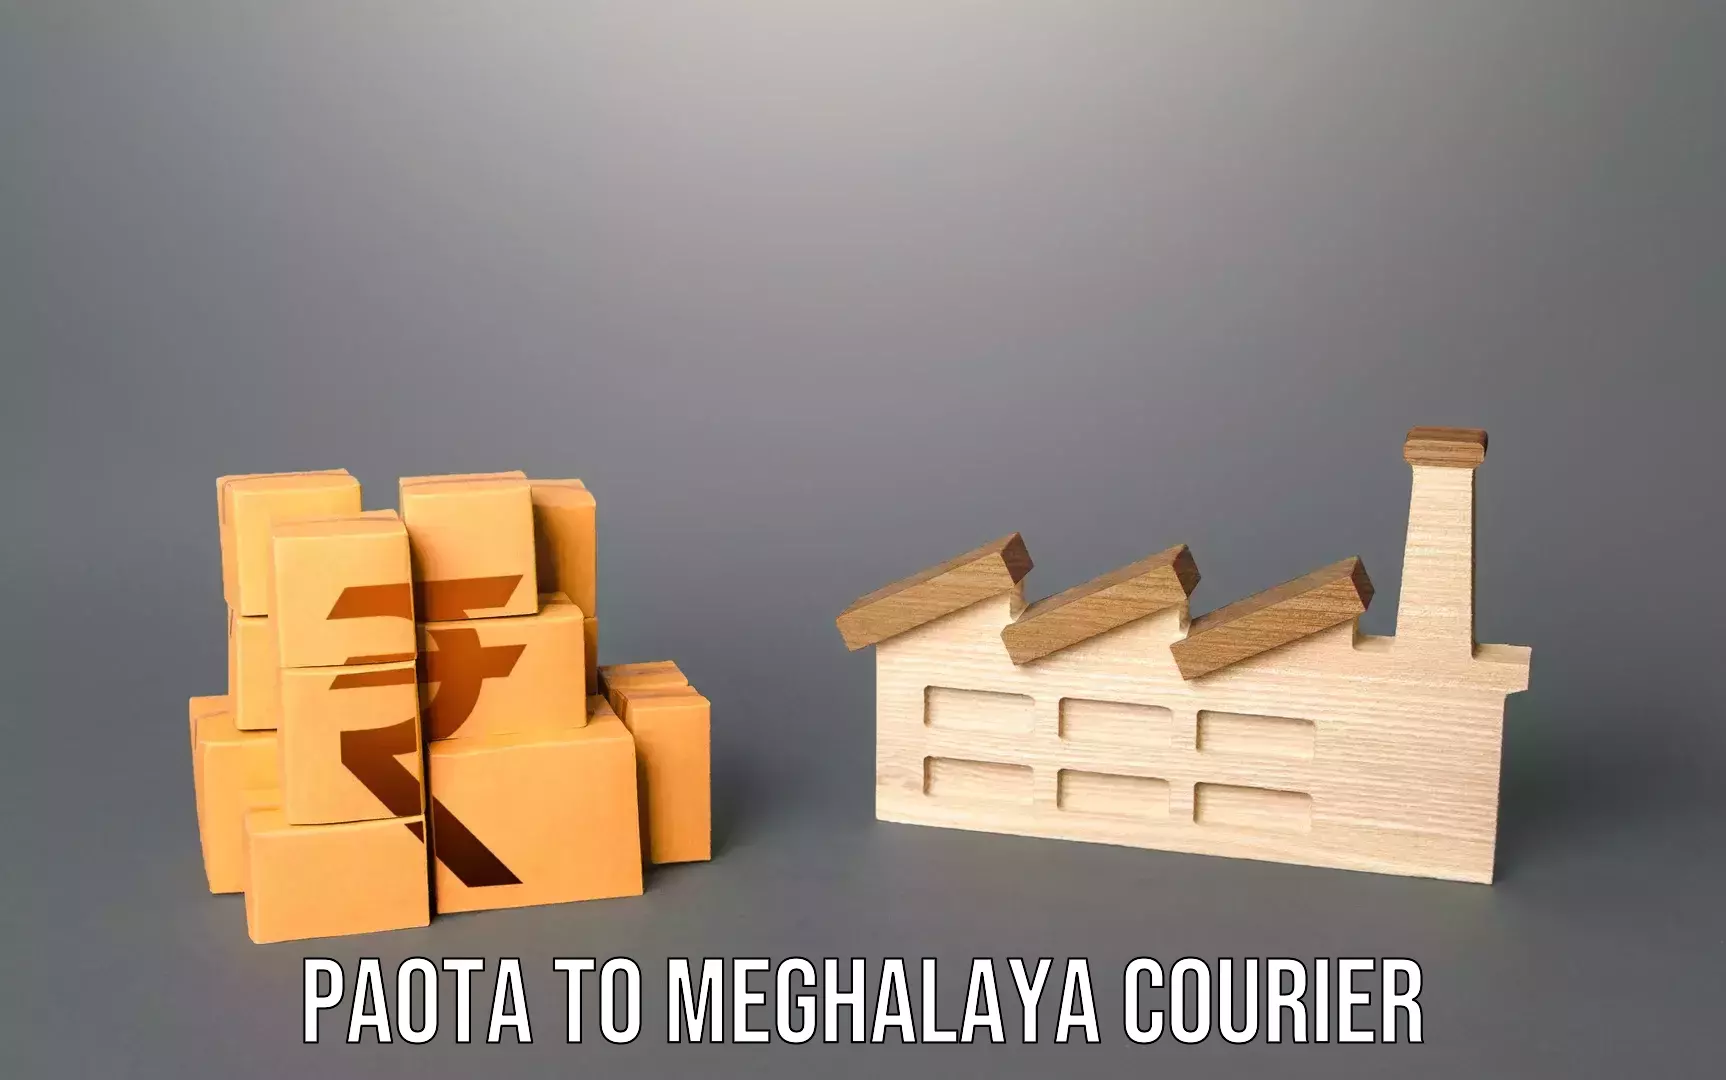 Luggage delivery system Paota to Meghalaya